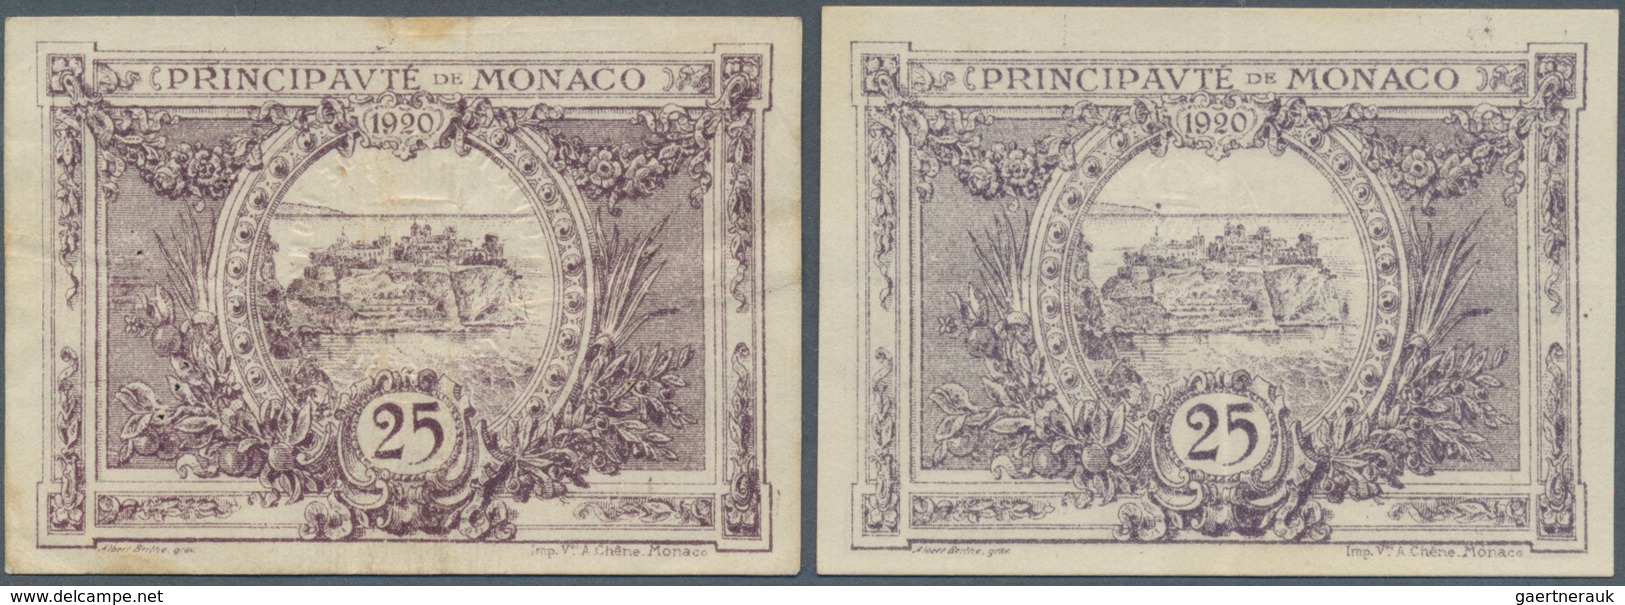 Monaco: Set Of 2 Notes 25 Centimes 1920 P. 2b ,c, Lilac Color, Strong Paper, But Folded In Condition - Monaco